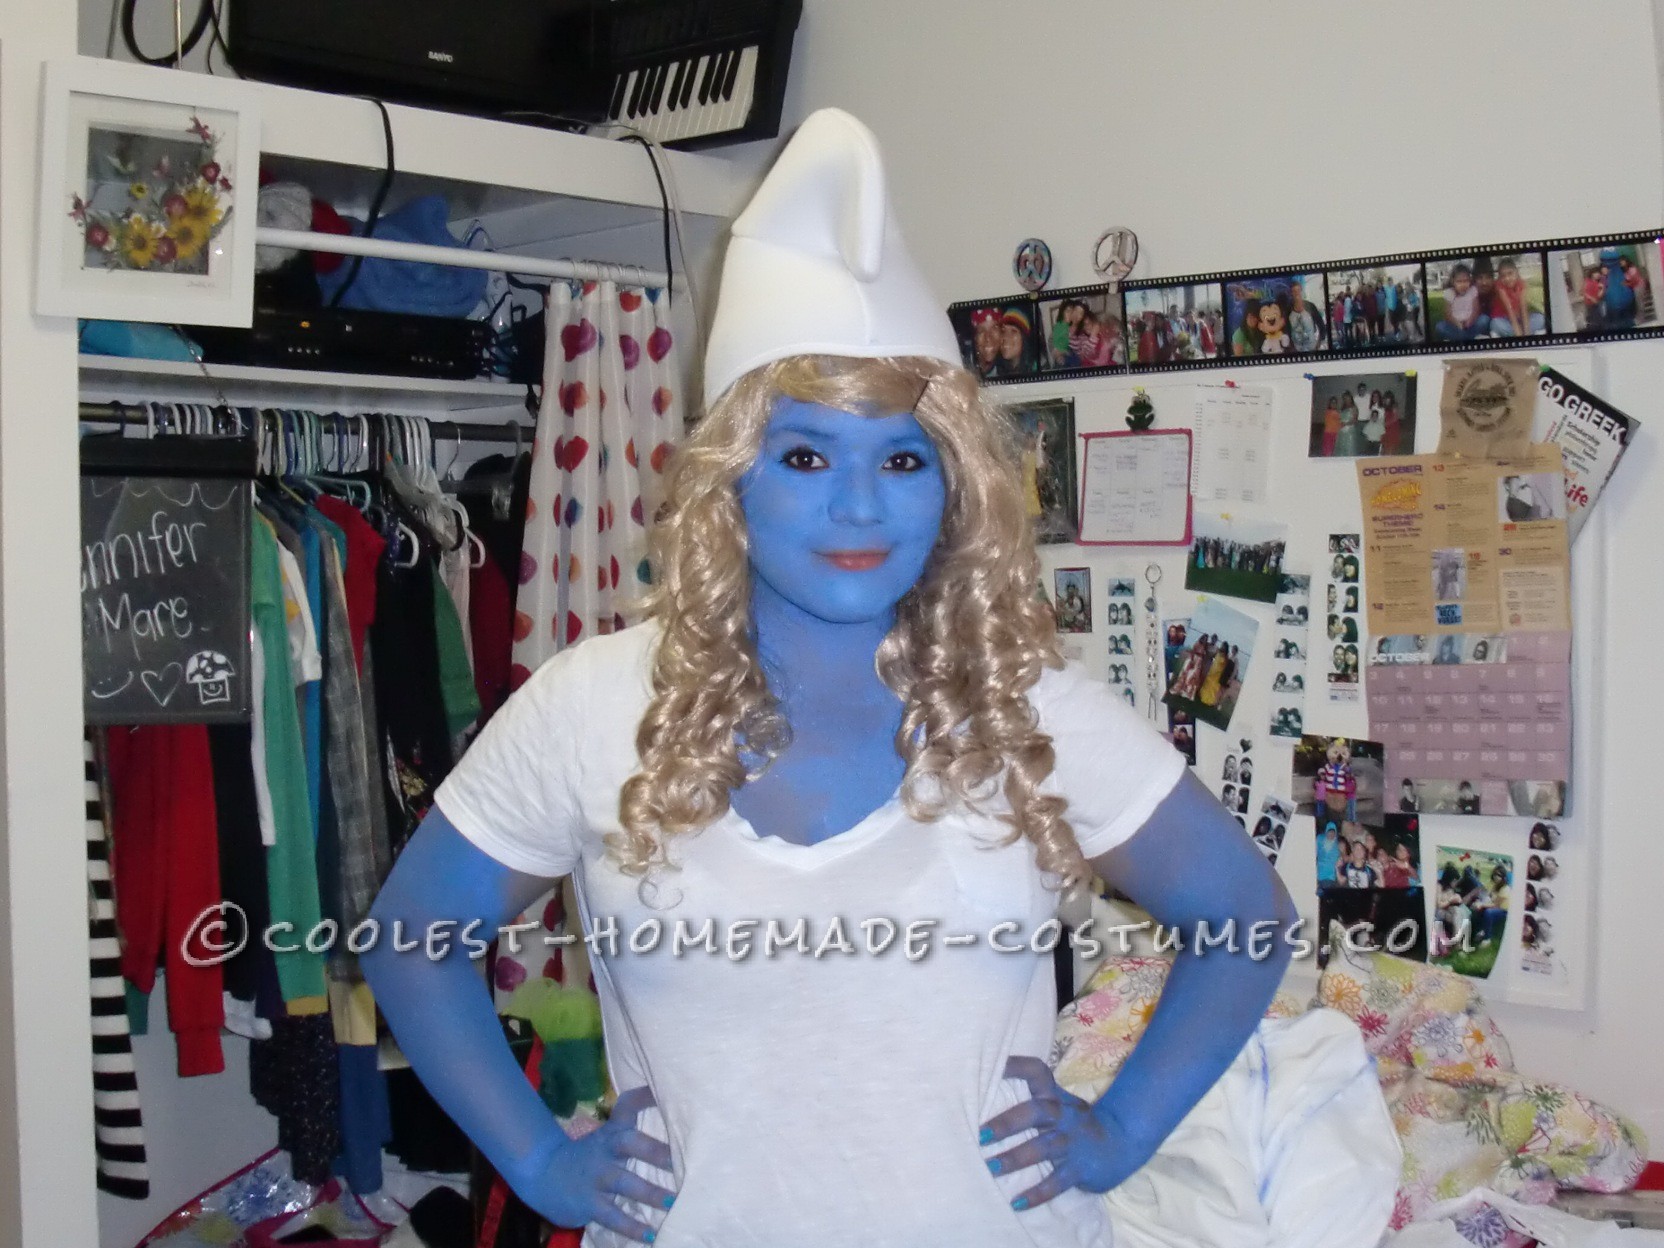 Halloween has been always been my favorite holiday! This is me a year before the movie \\\"the smurffs\\\" came out. I wanted to do something